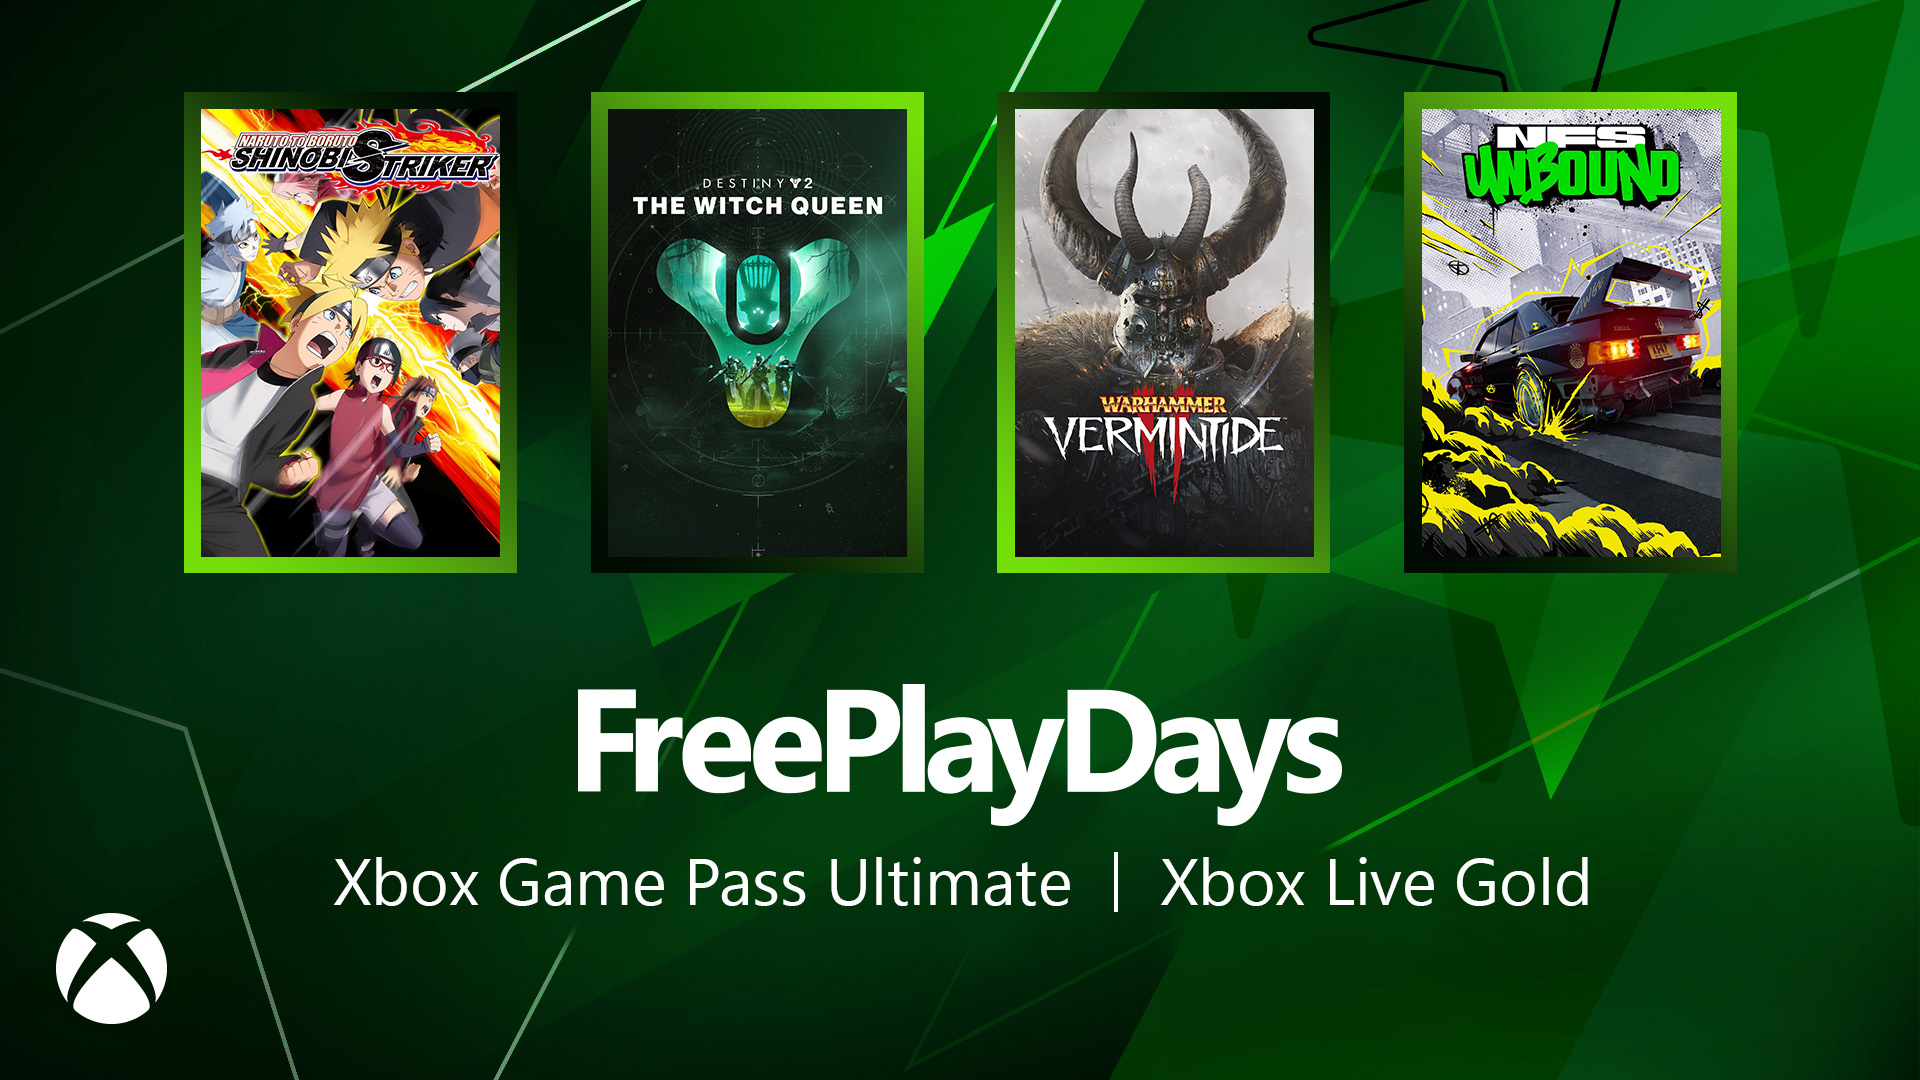 Free Play Days - August 24